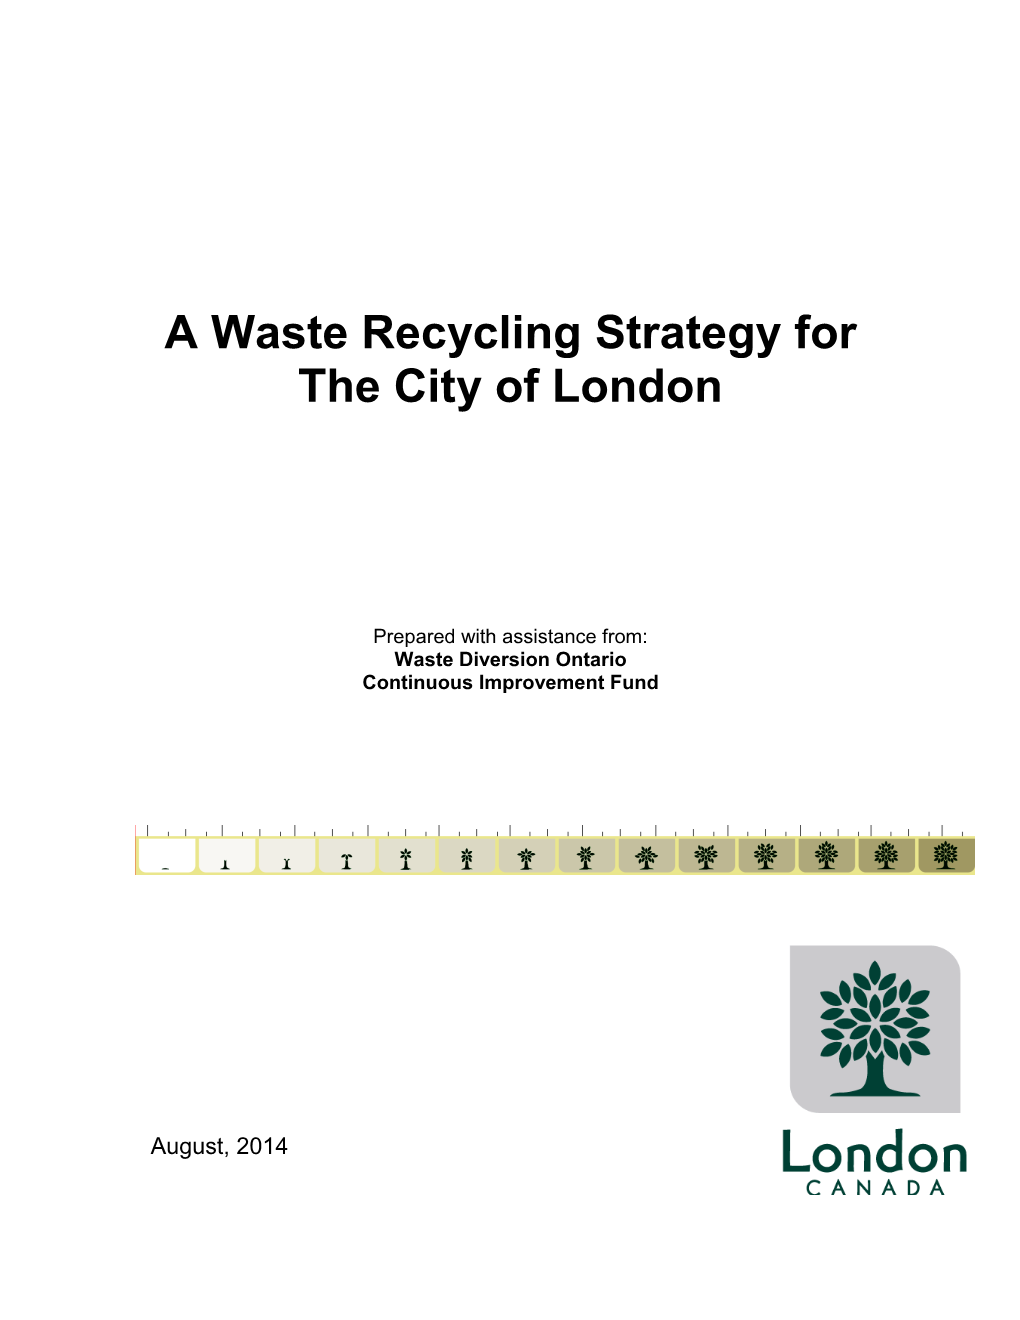 A Waste Recycling Strategy for the City of London